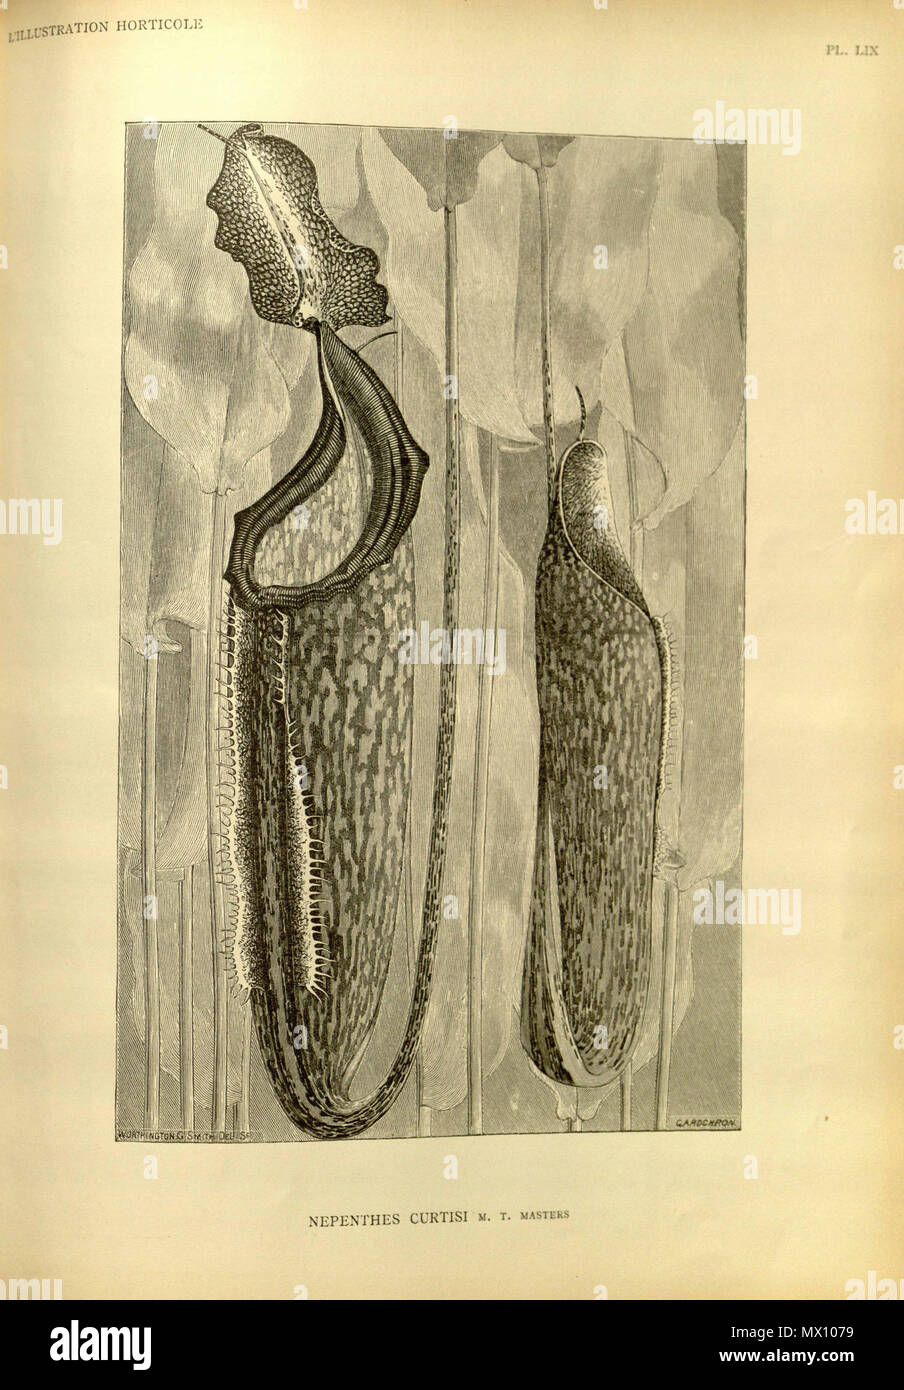 441 Nepenthes curtisii -'Illustration horticole (1888) Foto Stock